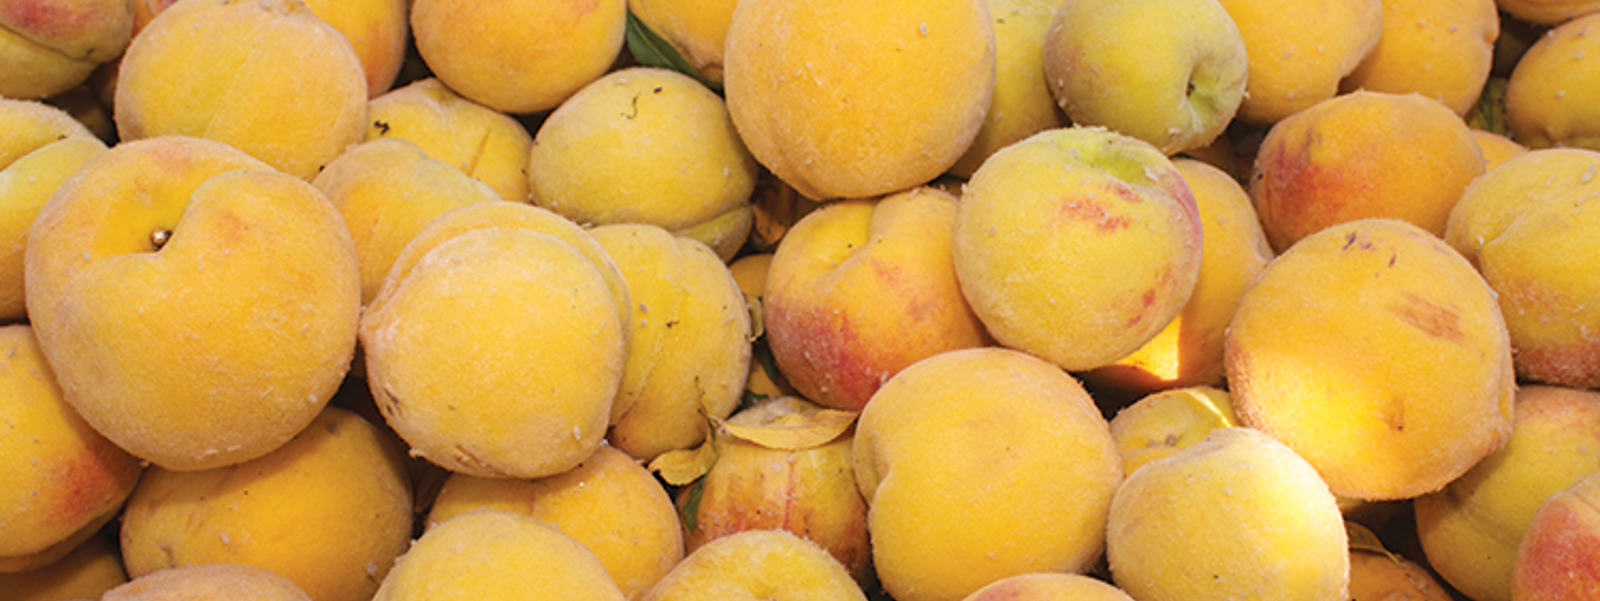 Customer demand for cling peaches exceeds production